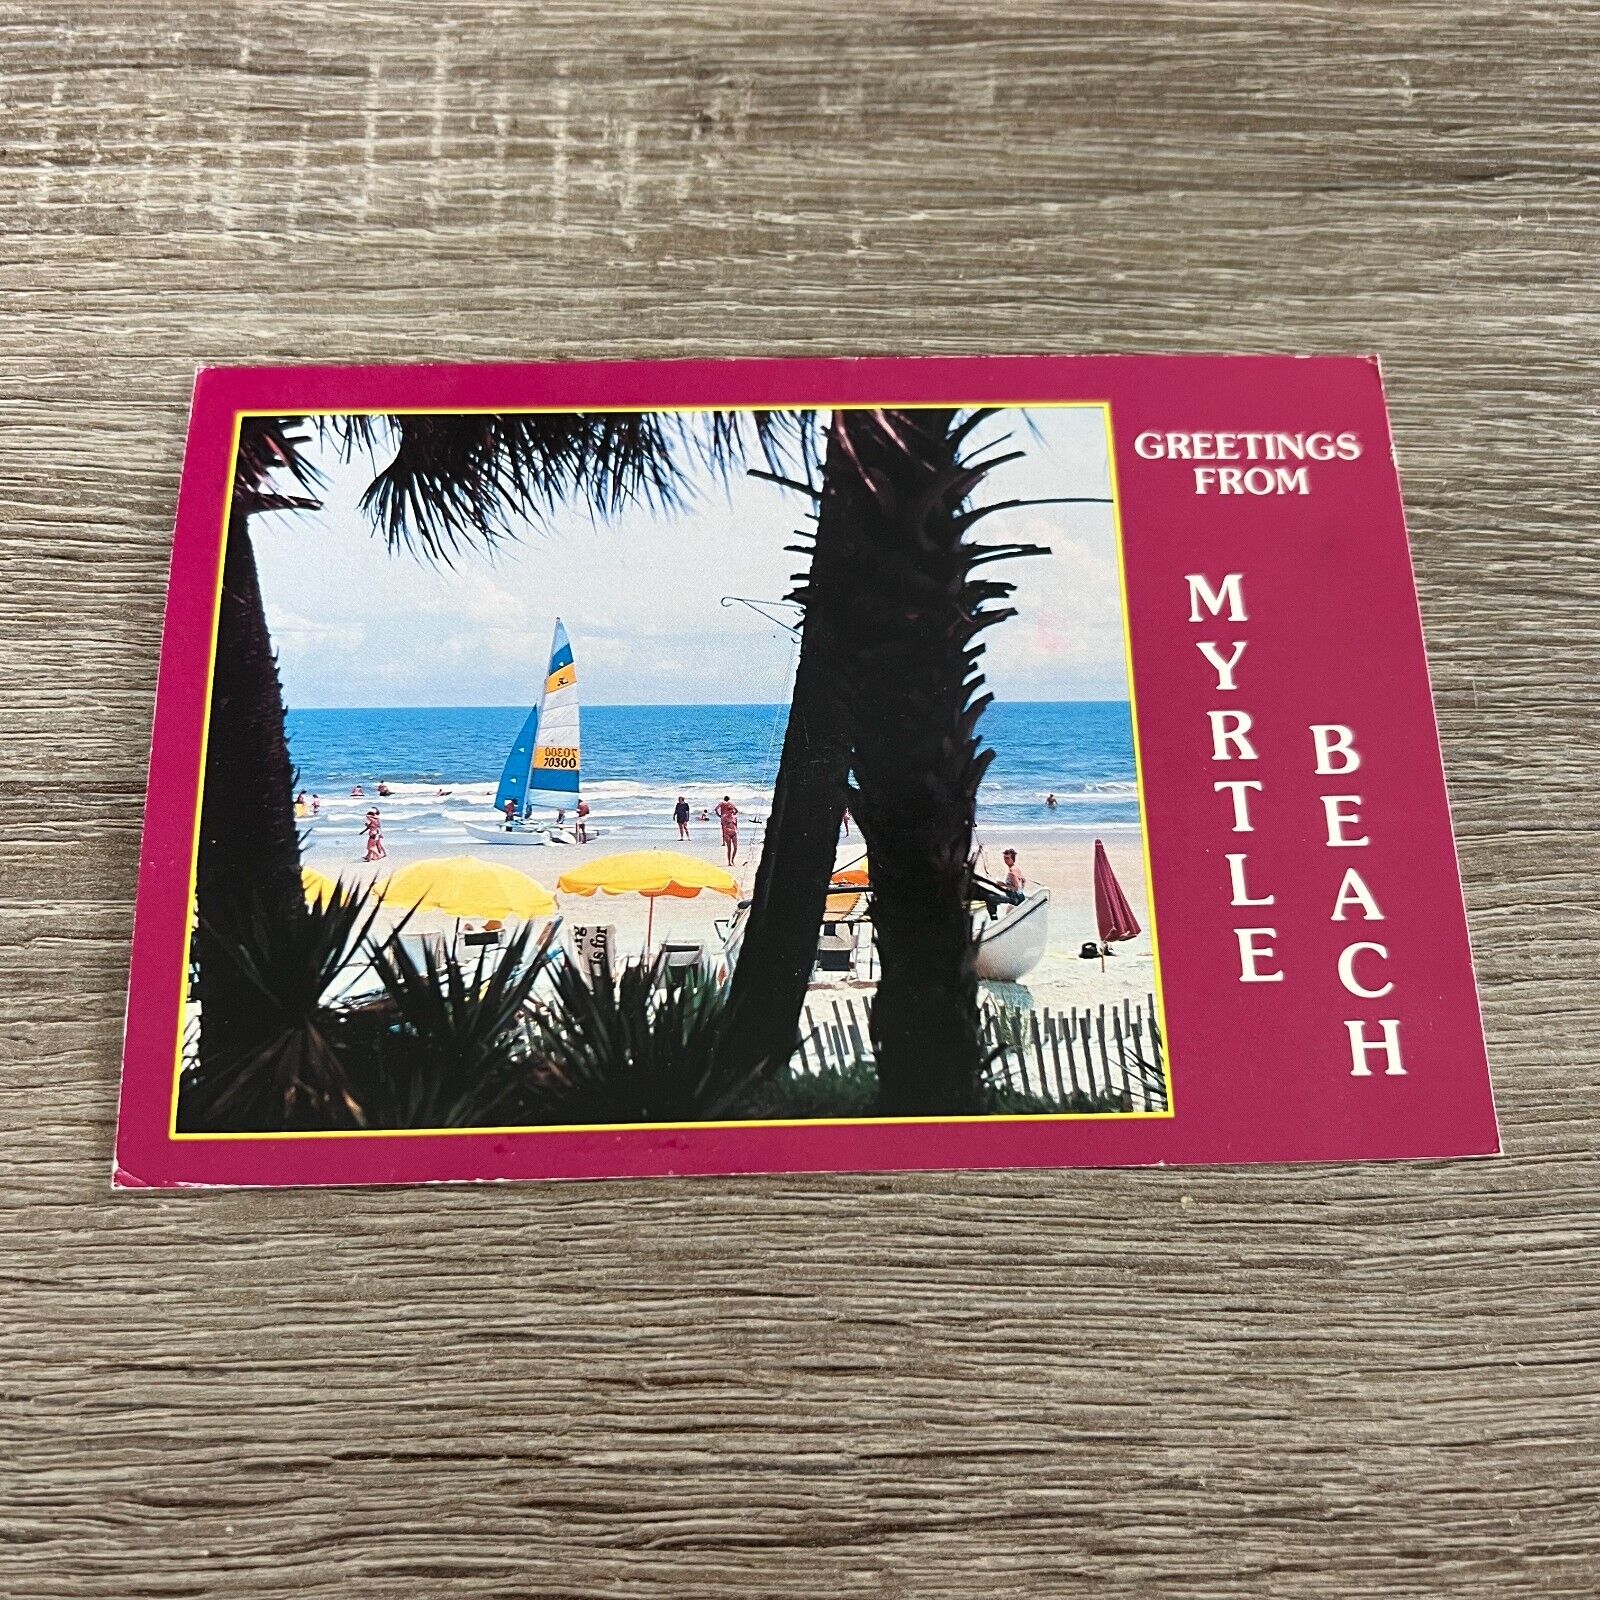 Postcard Greetings from Myrtle Beach South Carolina SC Postmarked 1991 Vintage